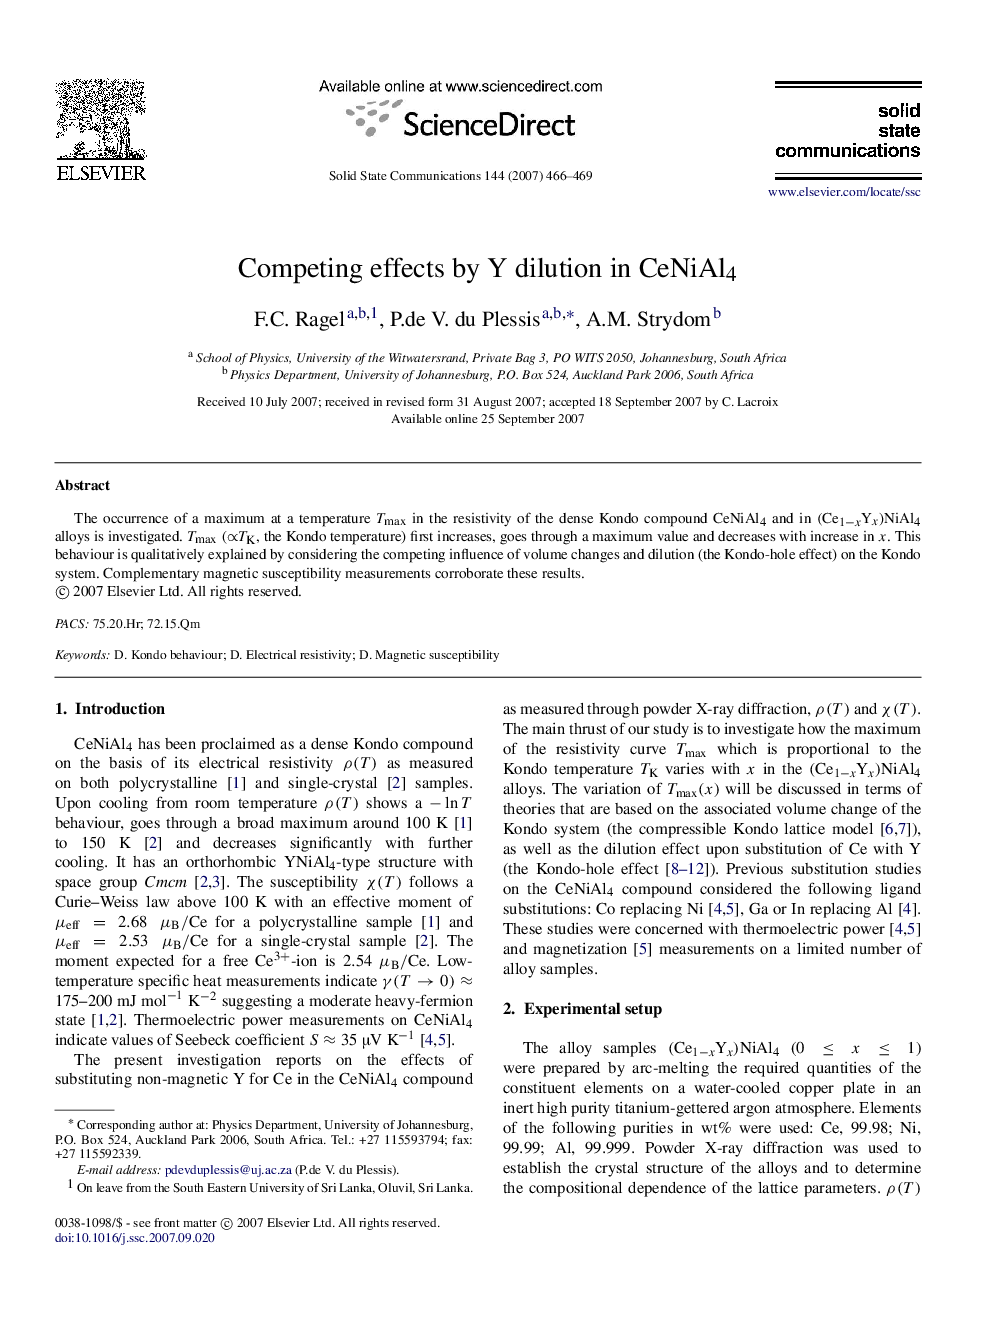 Competing effects by Y dilution in CeNiAl4